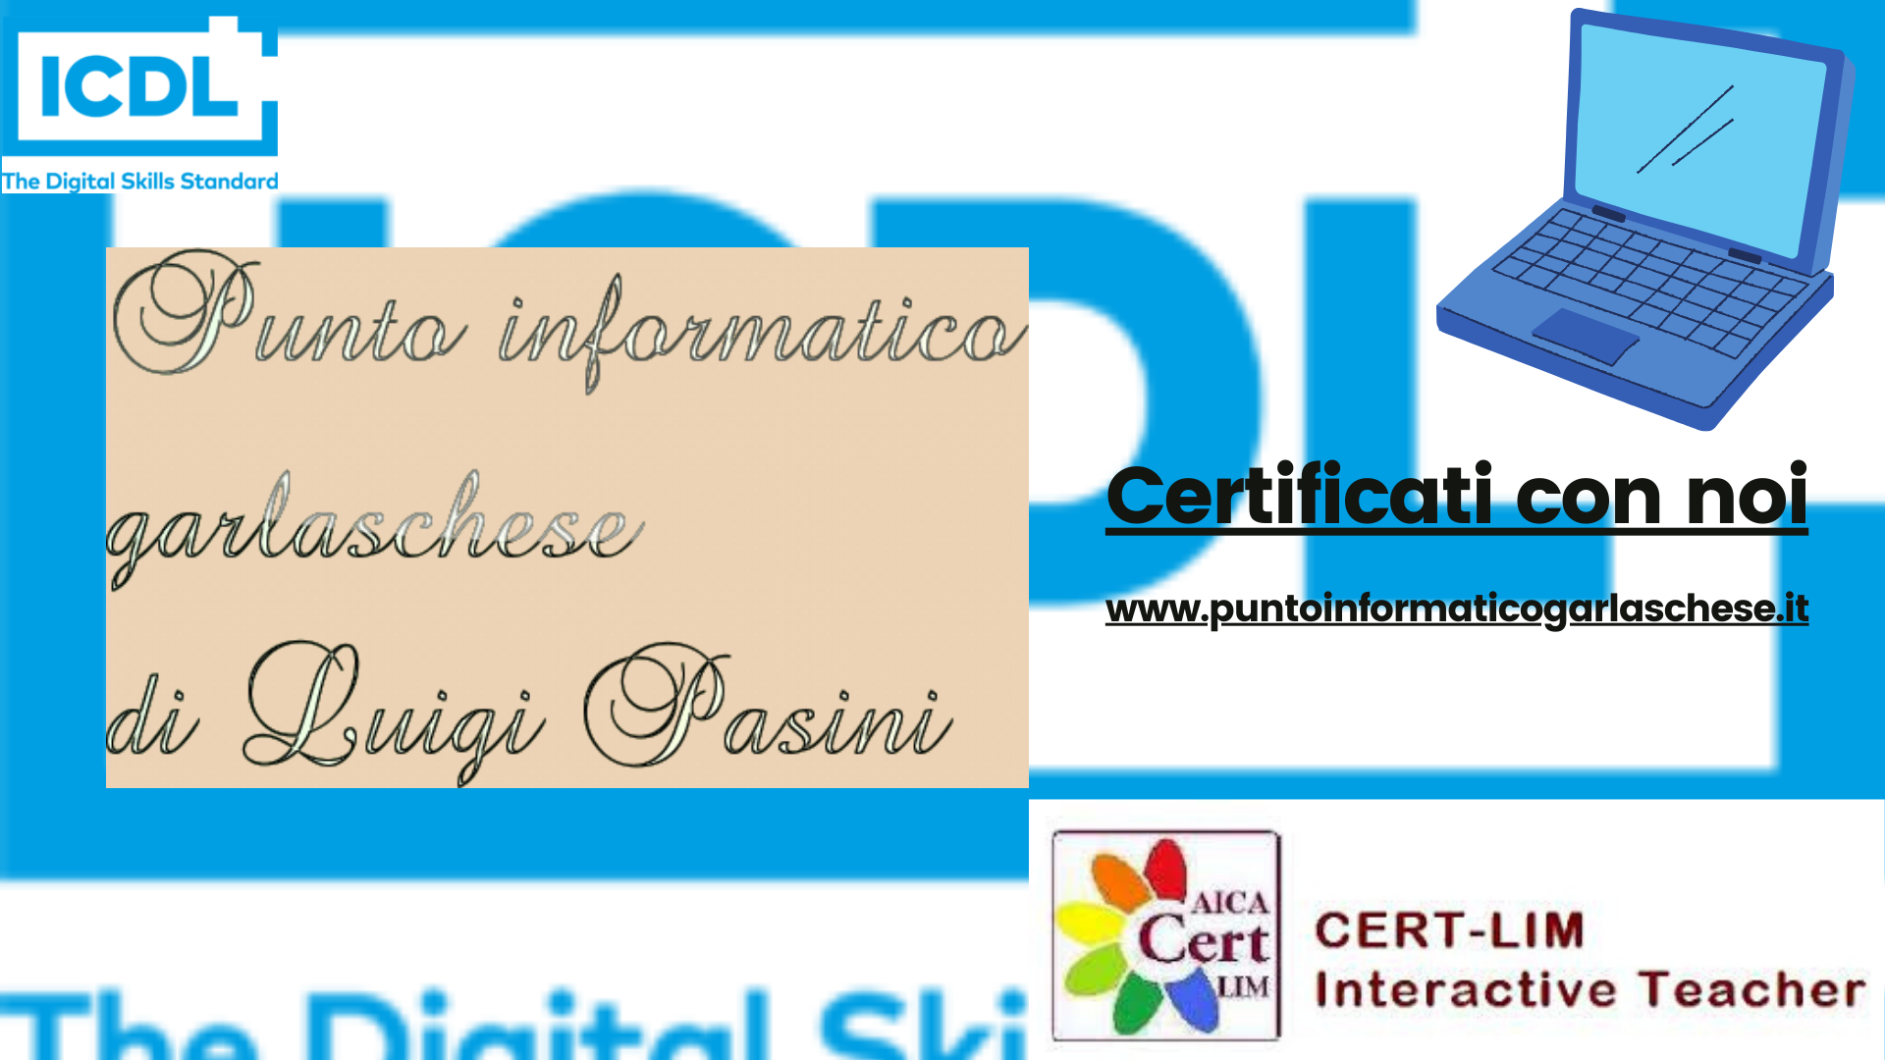 ICDL, corsionline, Word, Excel, Power Point